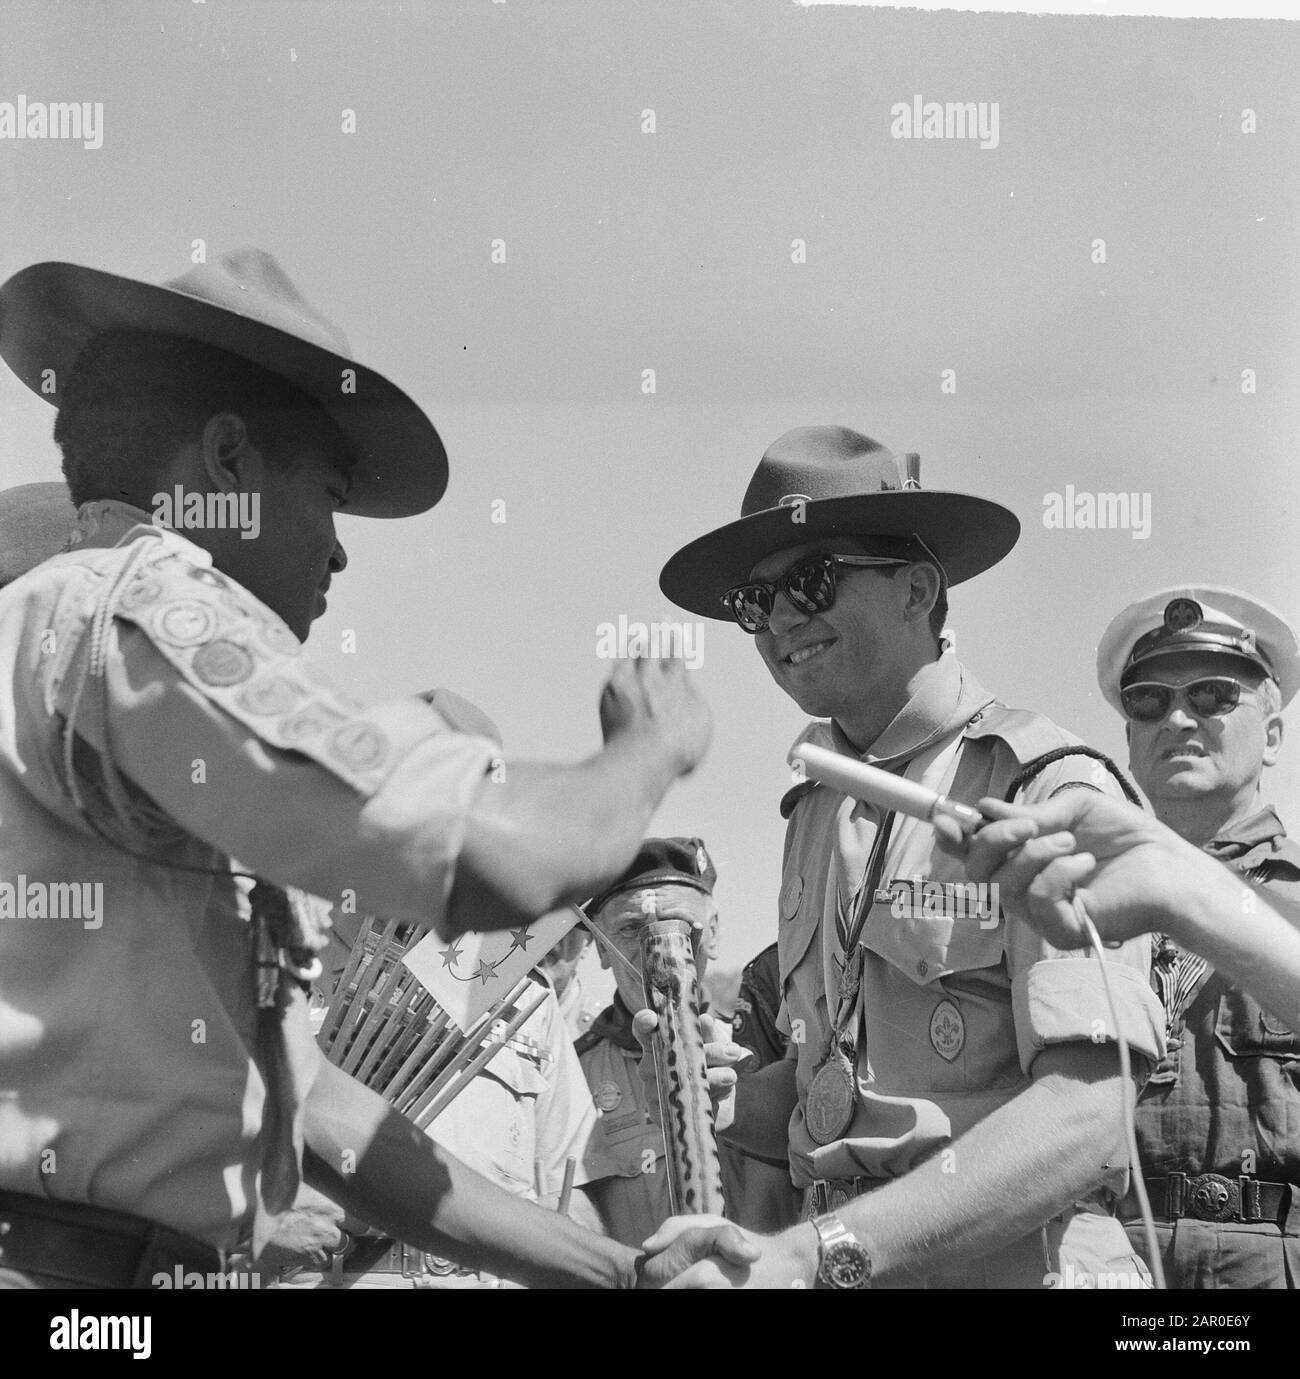 Jamboree 1963 at Marathon Greece. The only Surinamer in the camp gave the prince an article of his country Date: 12 August 1963 Location: Greece Keywords: camps, princes Institution name: Jamboree Stock Photo